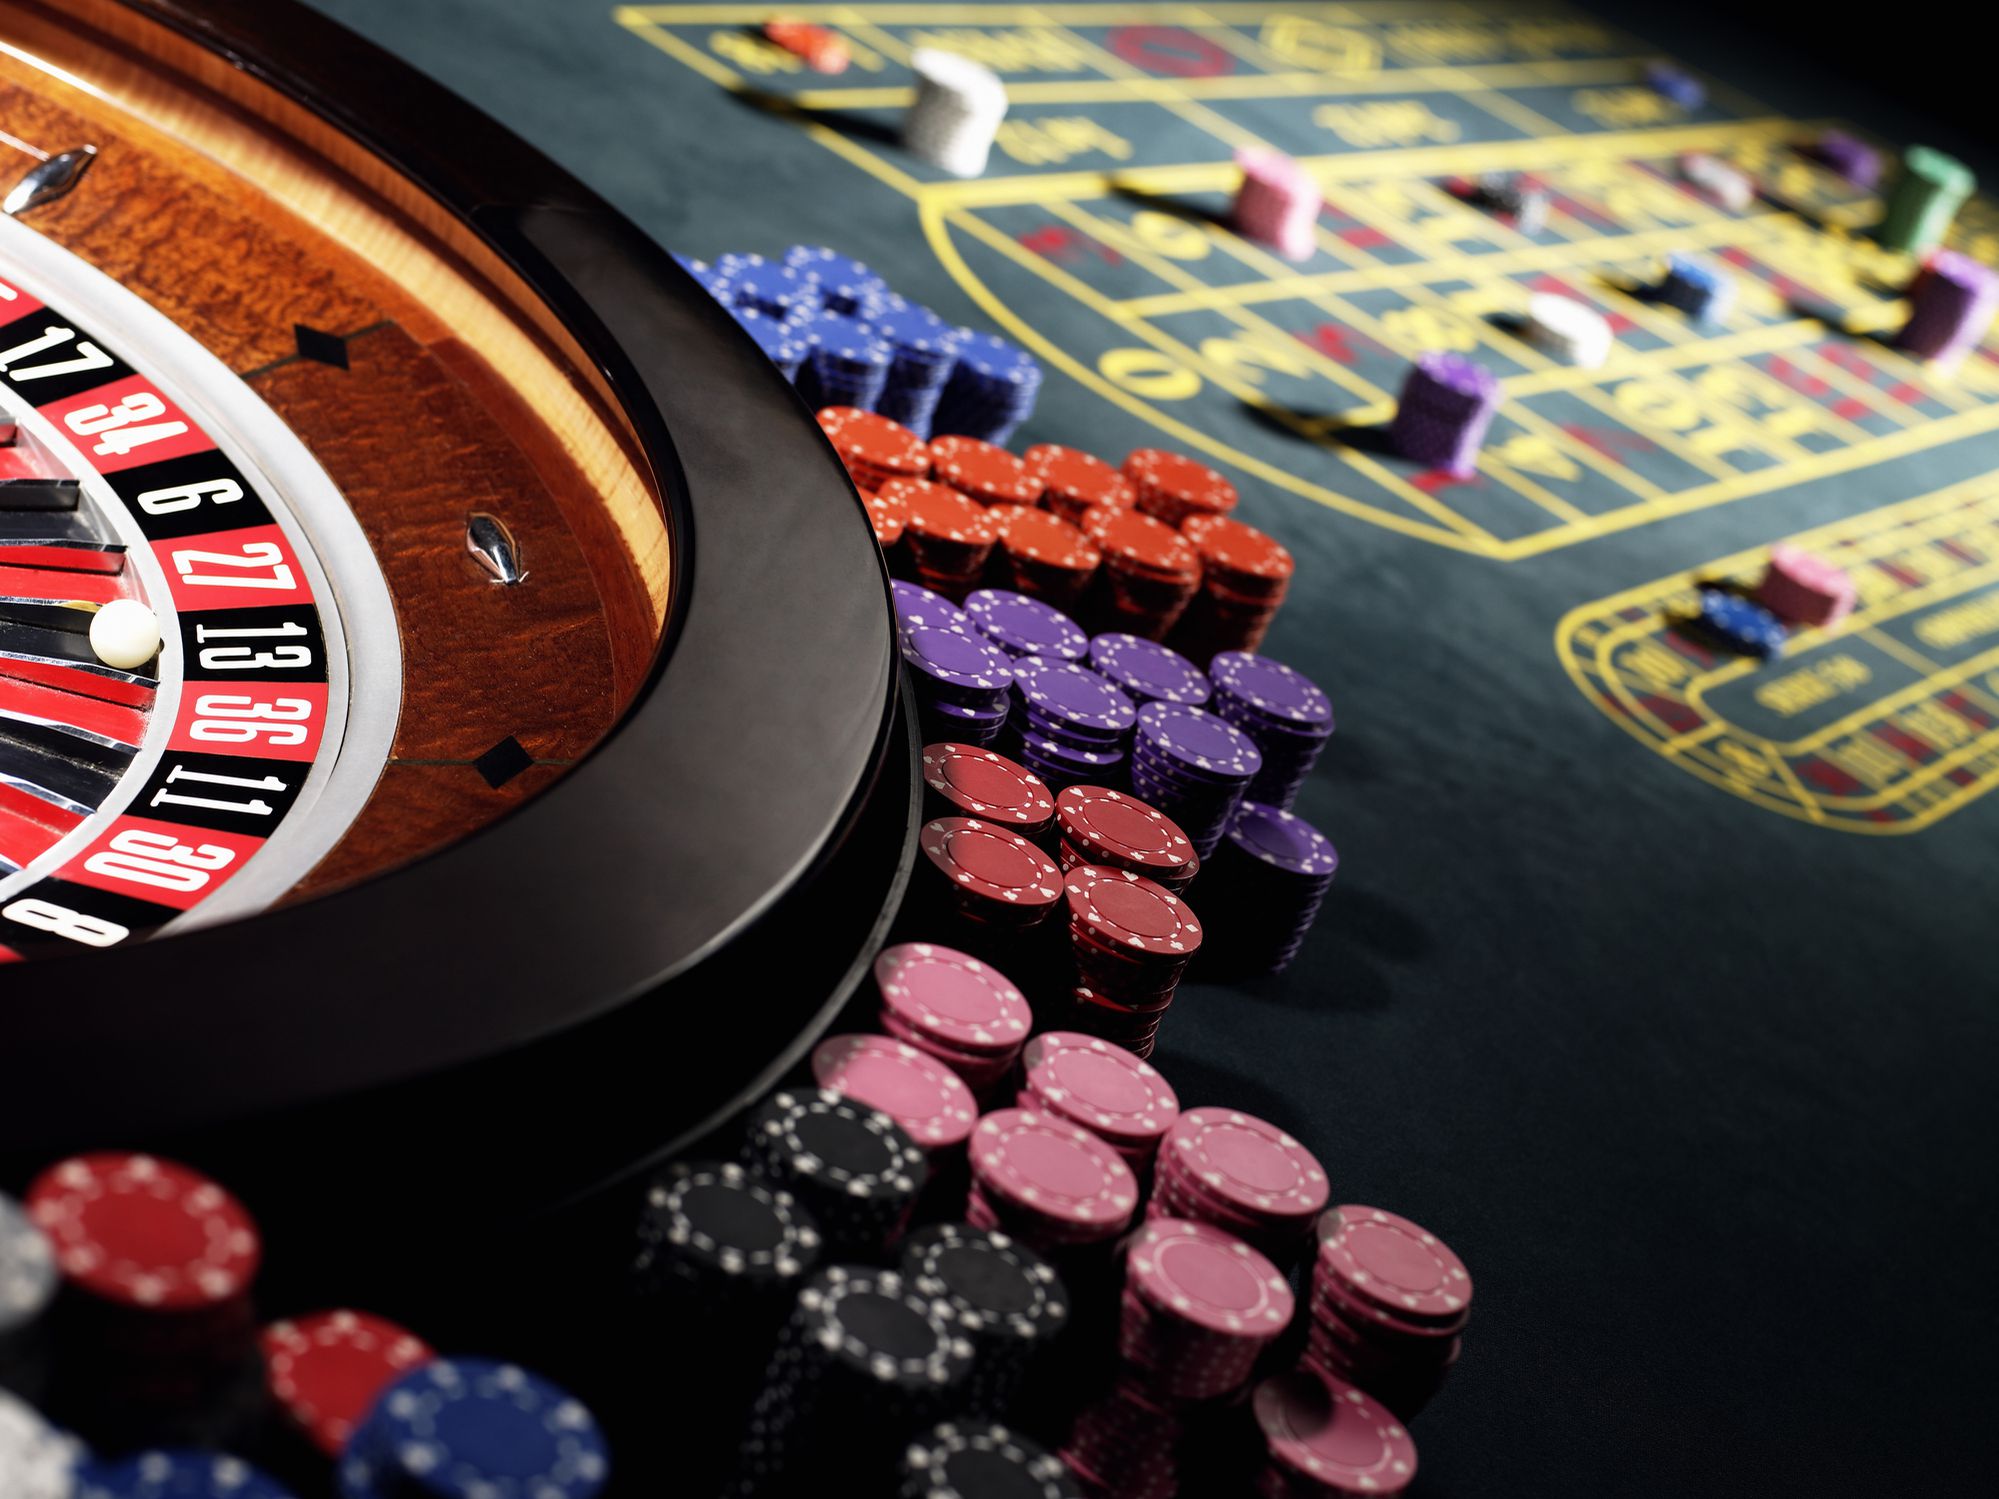 About the Gambling Games and Which are Better Games - Iop Event